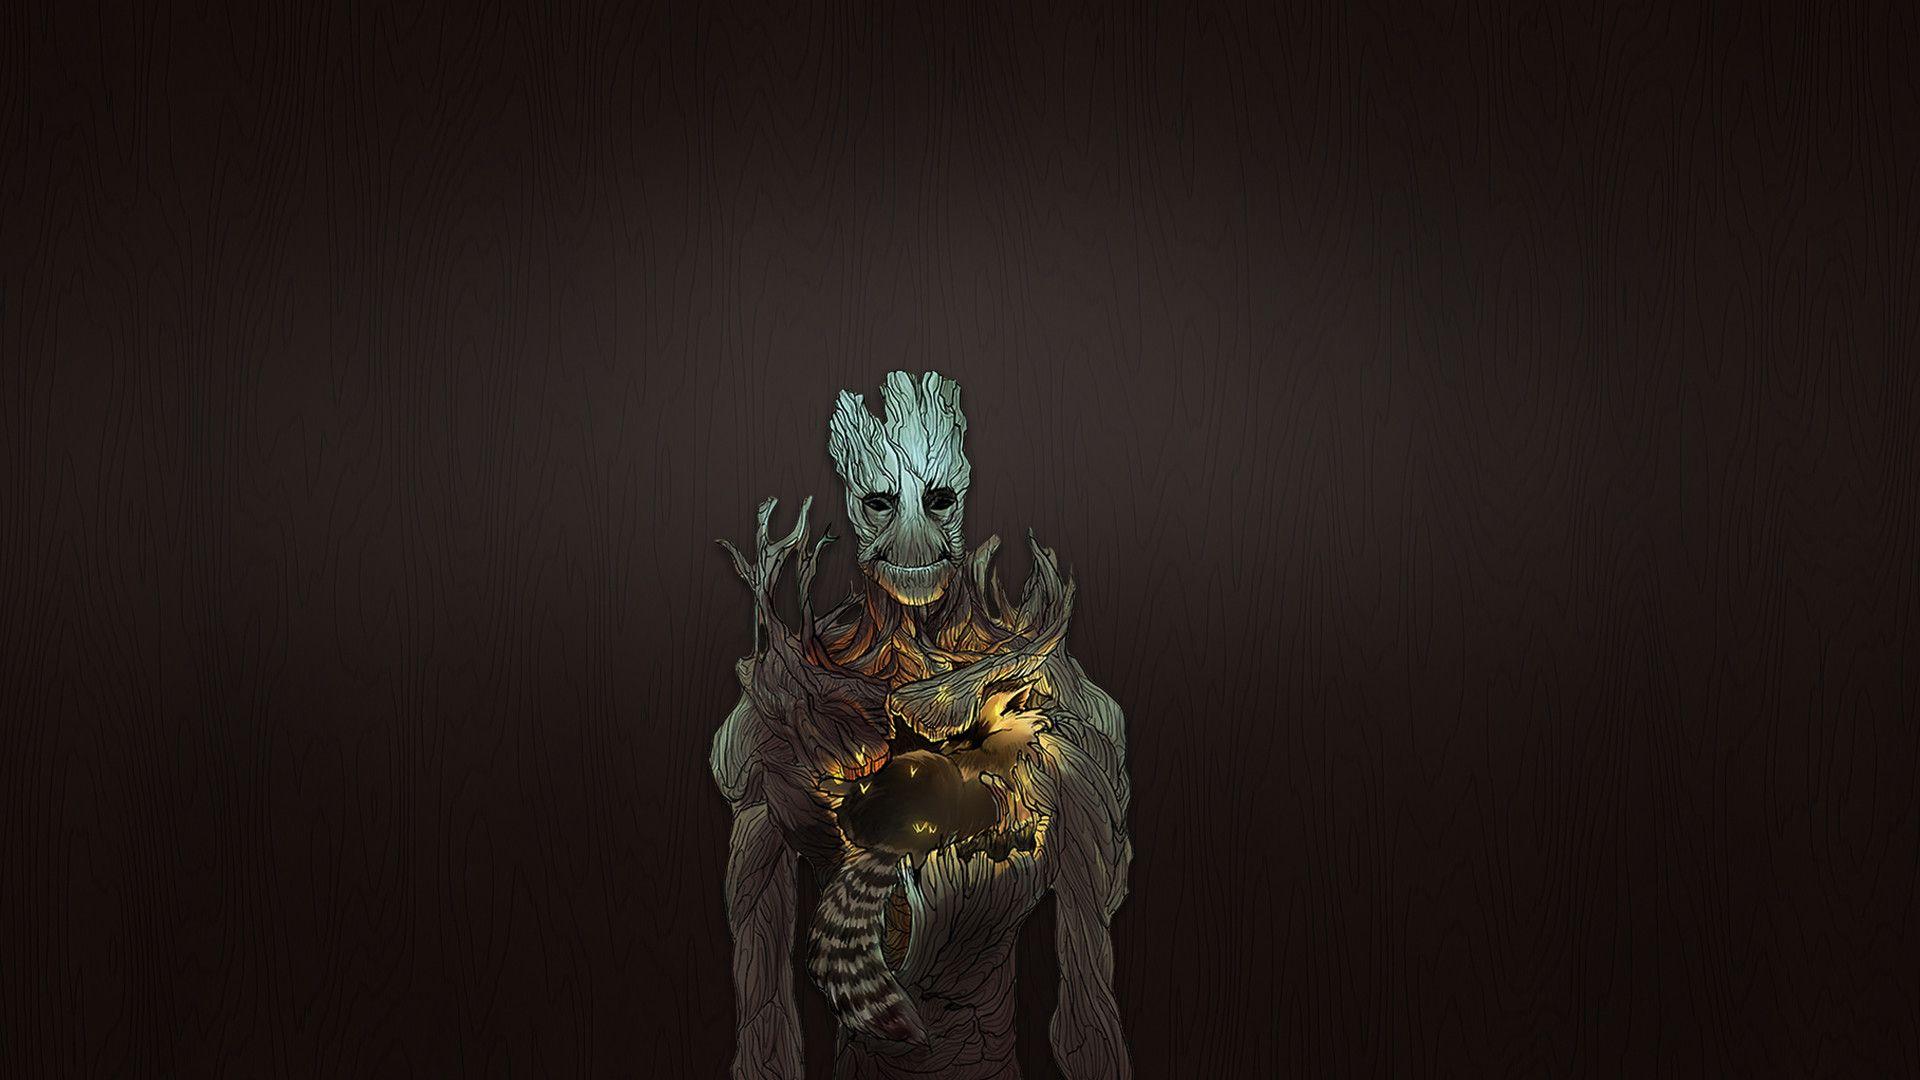 For all those GotG fans, heres Groot!